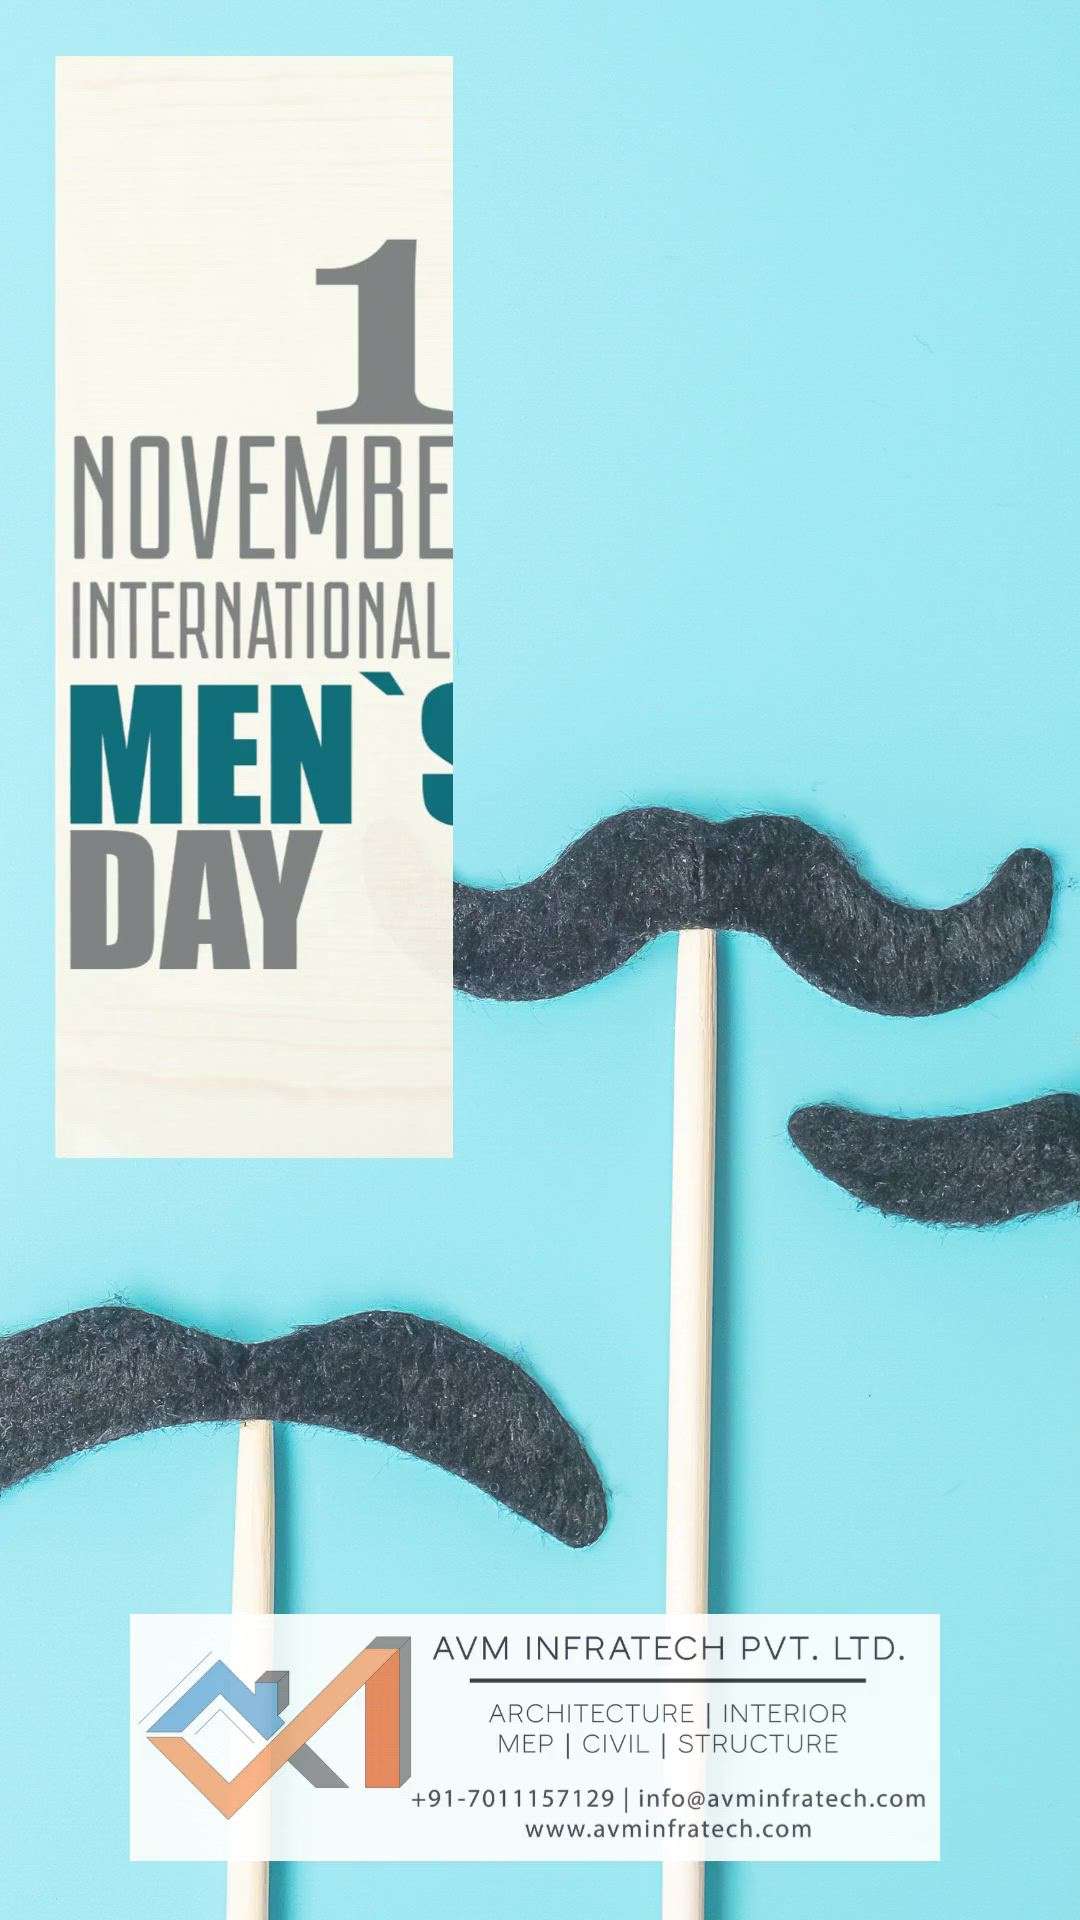 International Men's Day' 2022.


Follow us for more such amazing informations. 
.
.
#internationalmensday #international #men #mens #mensday #mensday2022 #2022 #day #celebration #celebrate #19thnovember #november #19 #internationalmensday2022 #menday #man #architect #architecture #interior #interiordesign #commercial #residential #architecturedaily #architectural #knowledge #delhi #newdelhi #india #mentalhealth #mentalhealthawareness #mentalhealthmatters